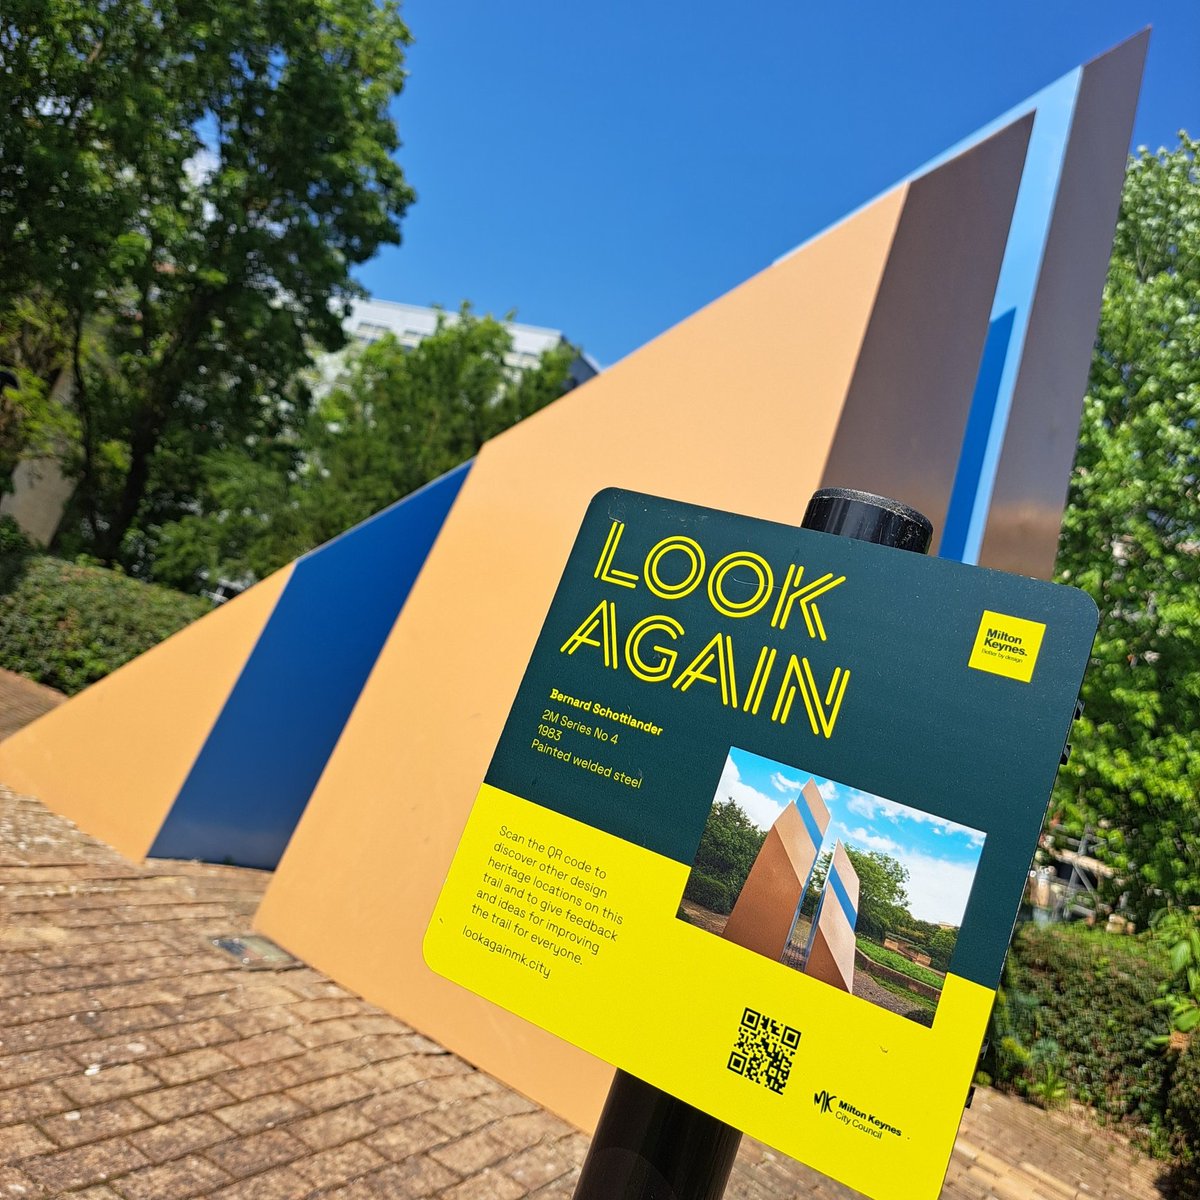 Have you entered our #LookAgain photo comp yet?

The new FREE trail around #MiltonKeynes City Centre is a unique guide to the modern heritage, art, architecture and design you can discover! Take a photo and you could win tickets to @MK_Gallery 📸👍

Enter: destinationmiltonkeynes.co.uk/look-again-com…